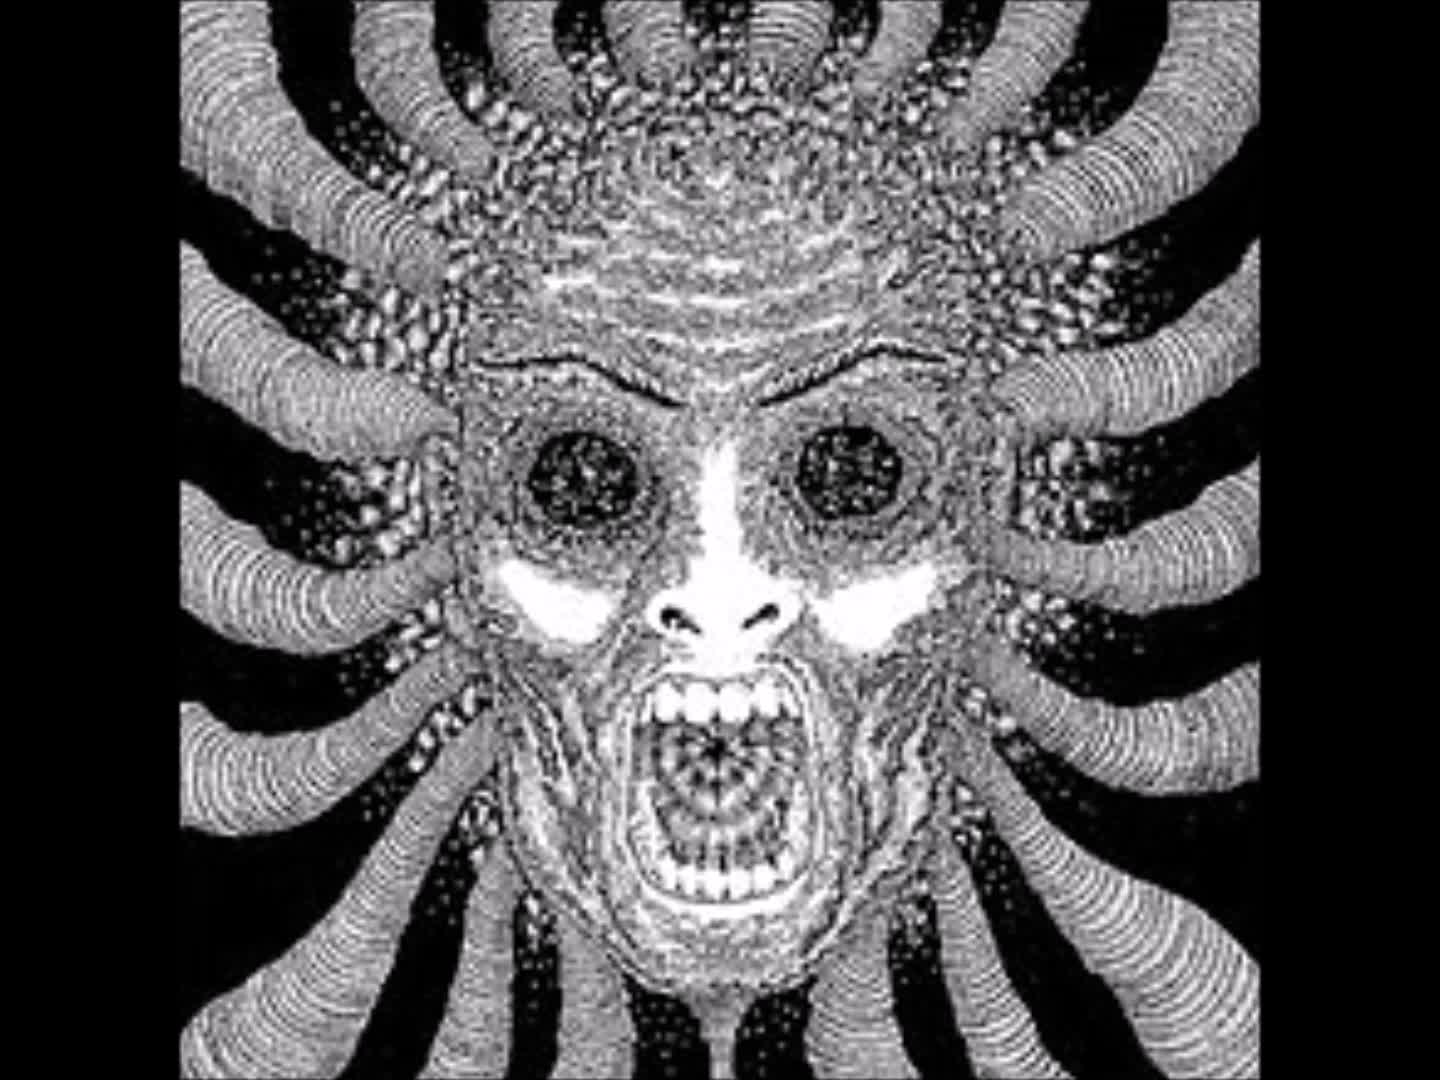 Ty Segall Band - Death